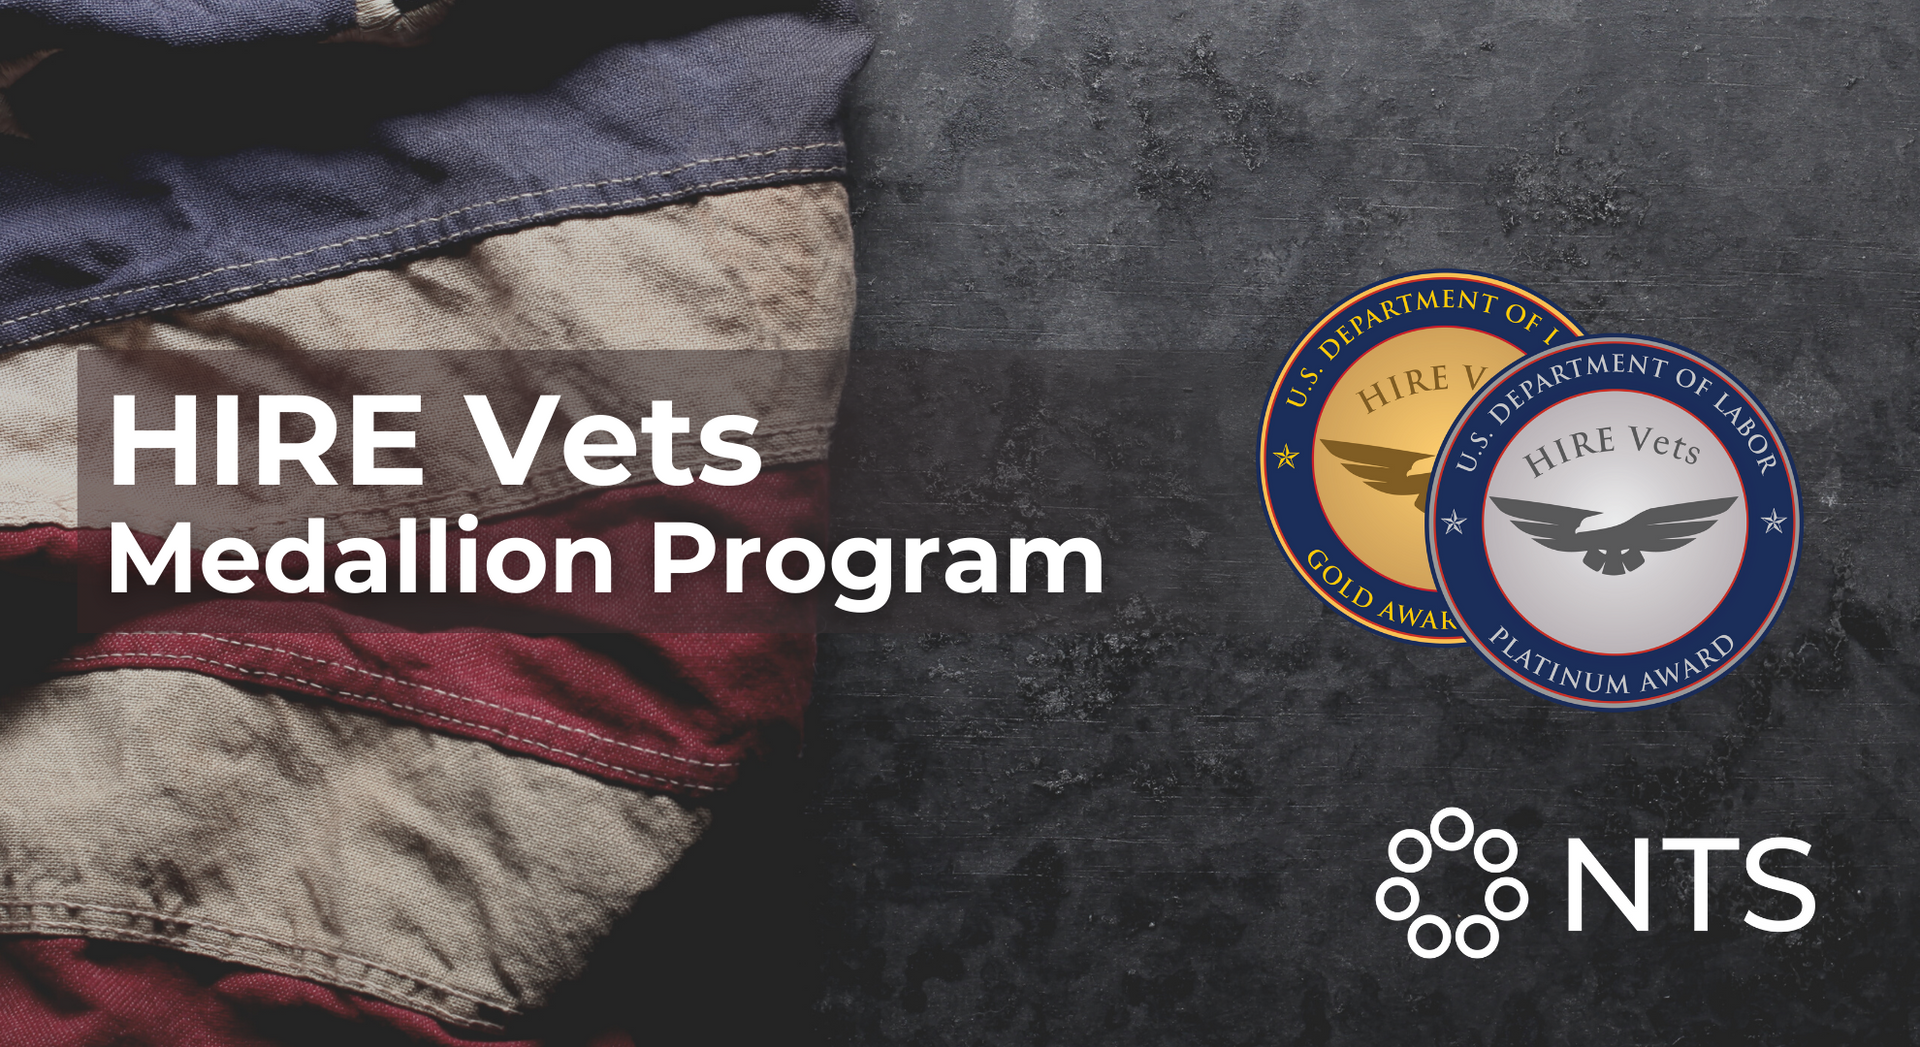 a poster for the hire vets medallion program